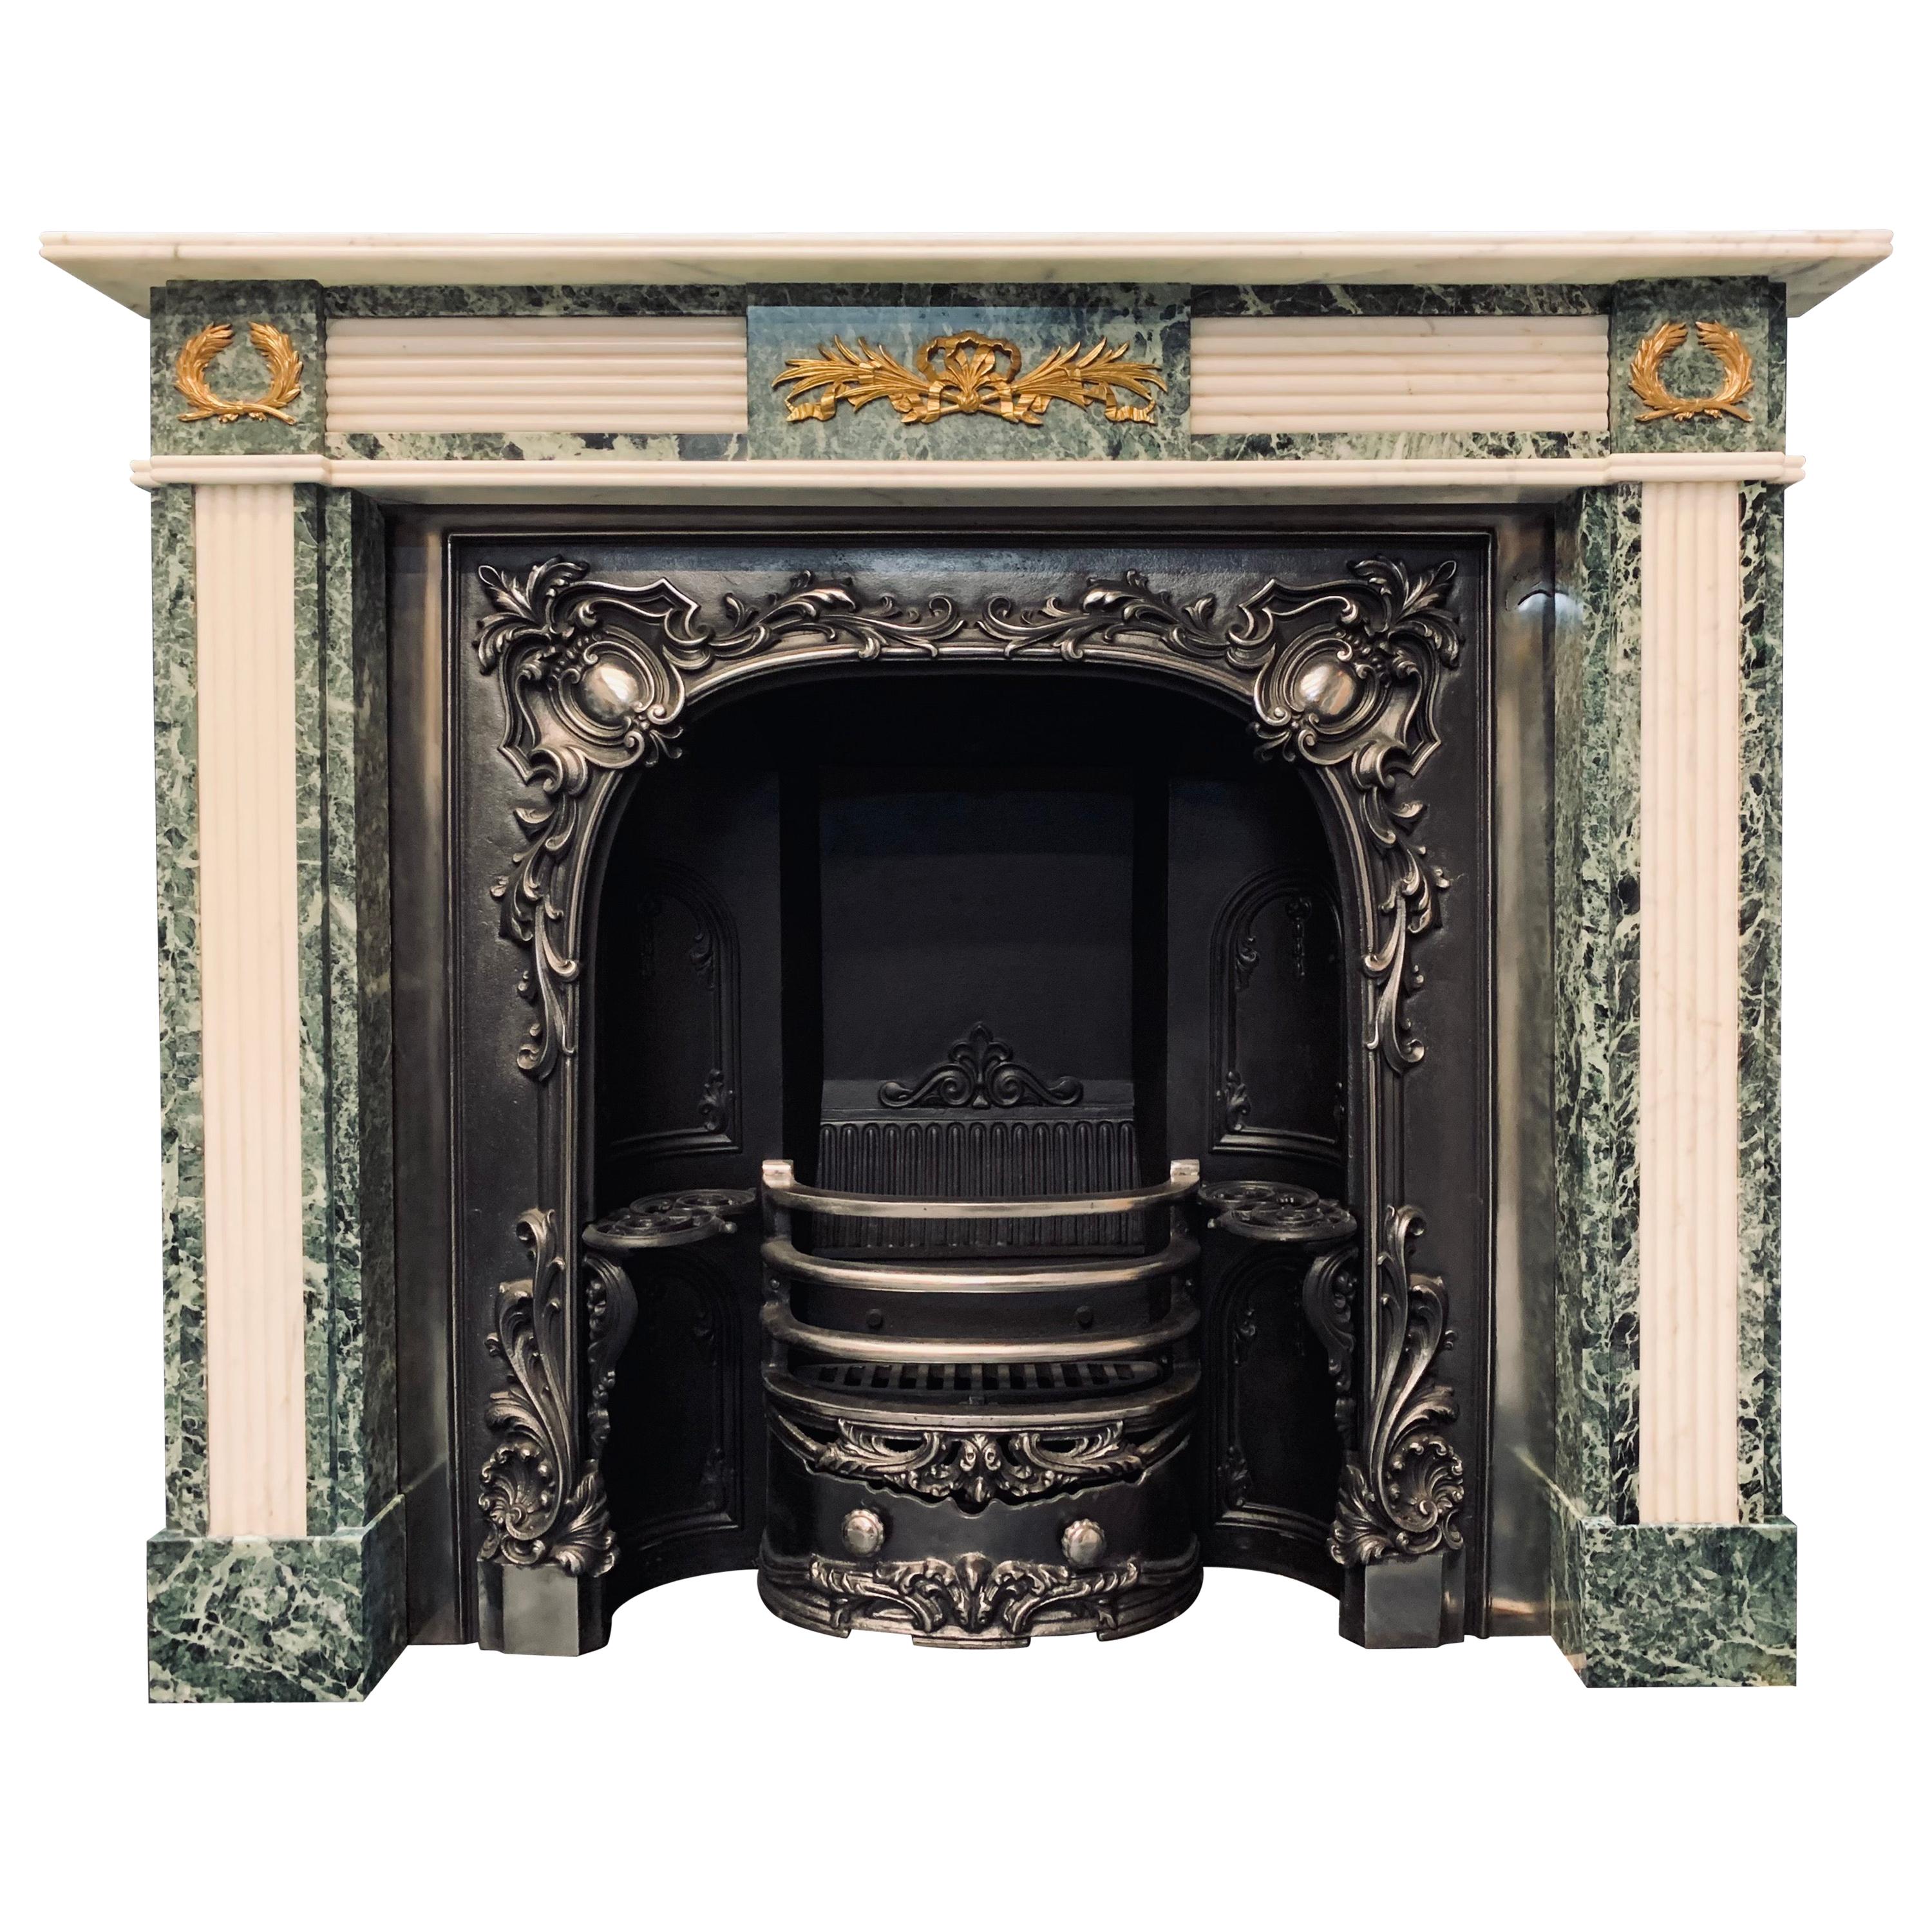 19th C Regency Style Verde Tinos Marble Fireplace Surround with Ormolu Mounts